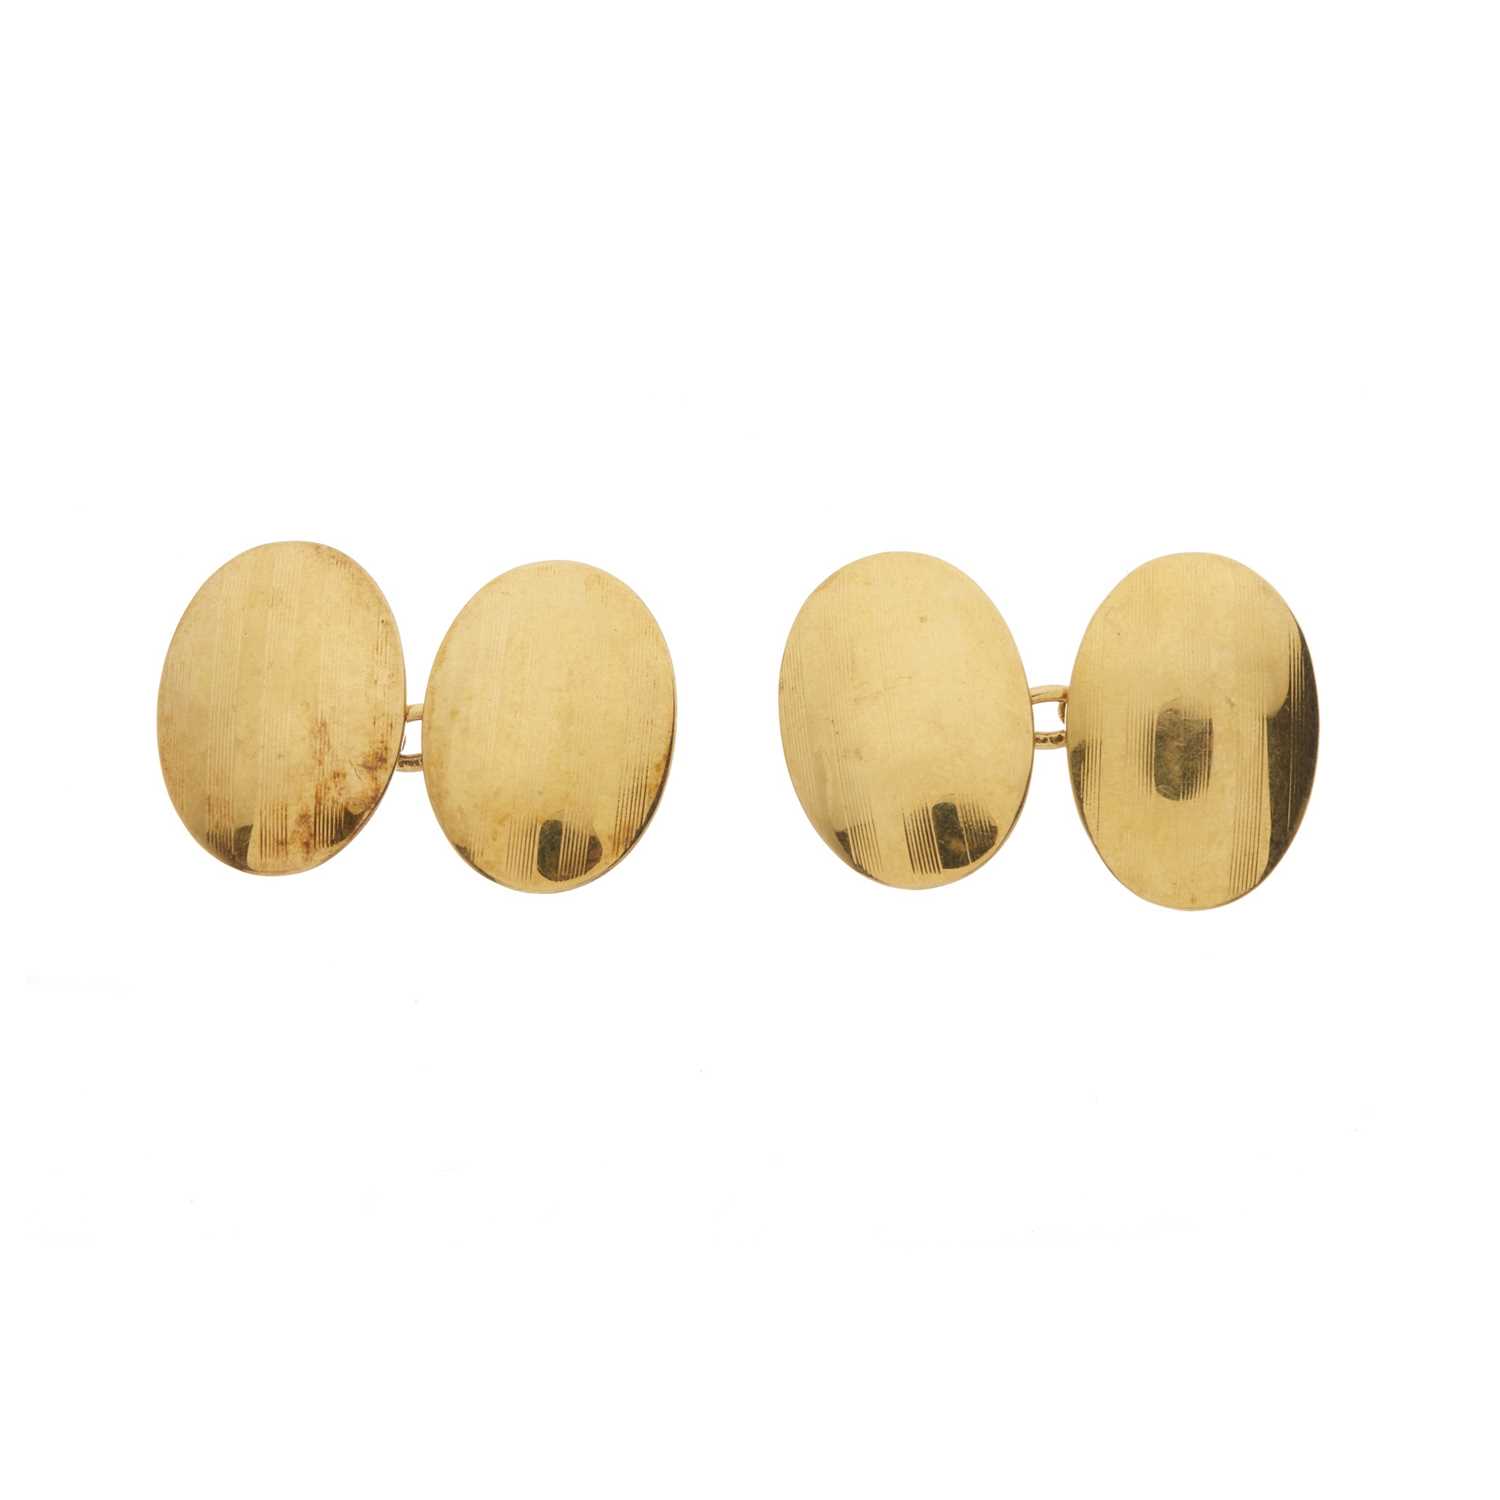 Deakin & Francis, a pair of early 20th century 18ct gold cufflinks